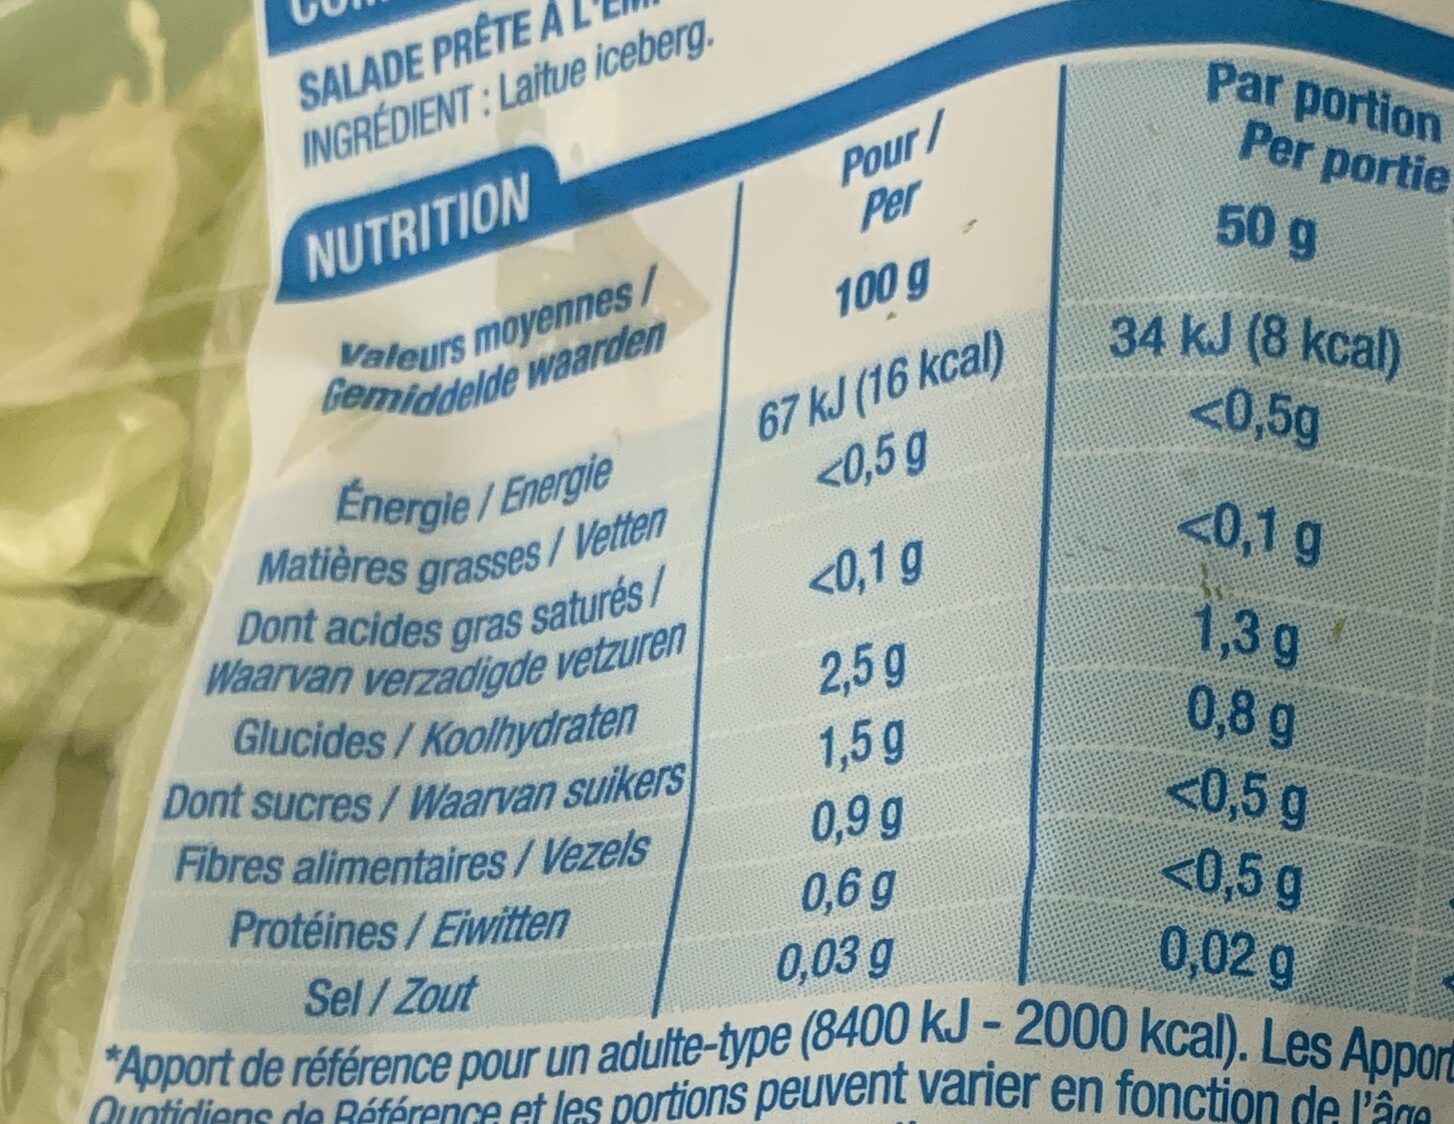 Laitue, Iceberg - Nutrition facts - fr